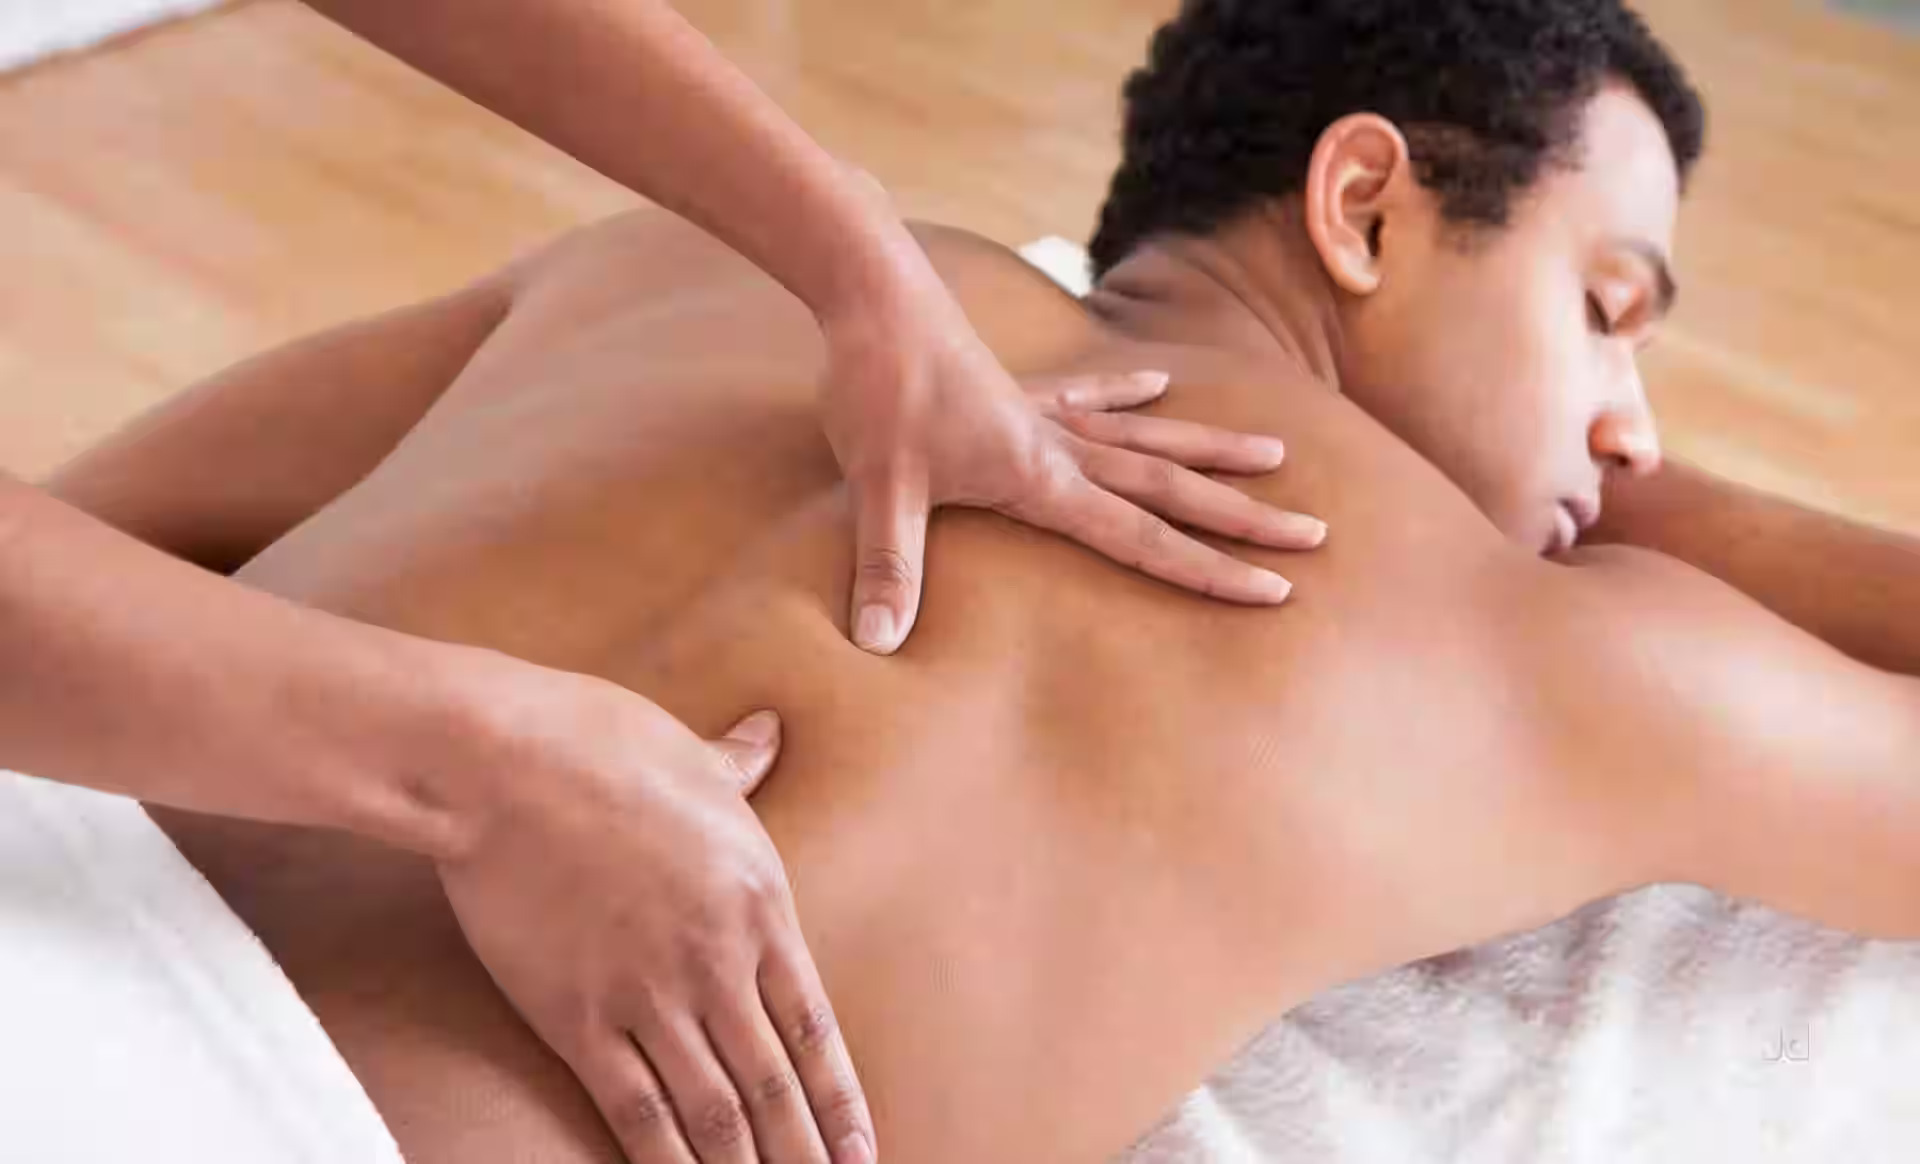 Can Jeju Massage help with stress and anxiety?